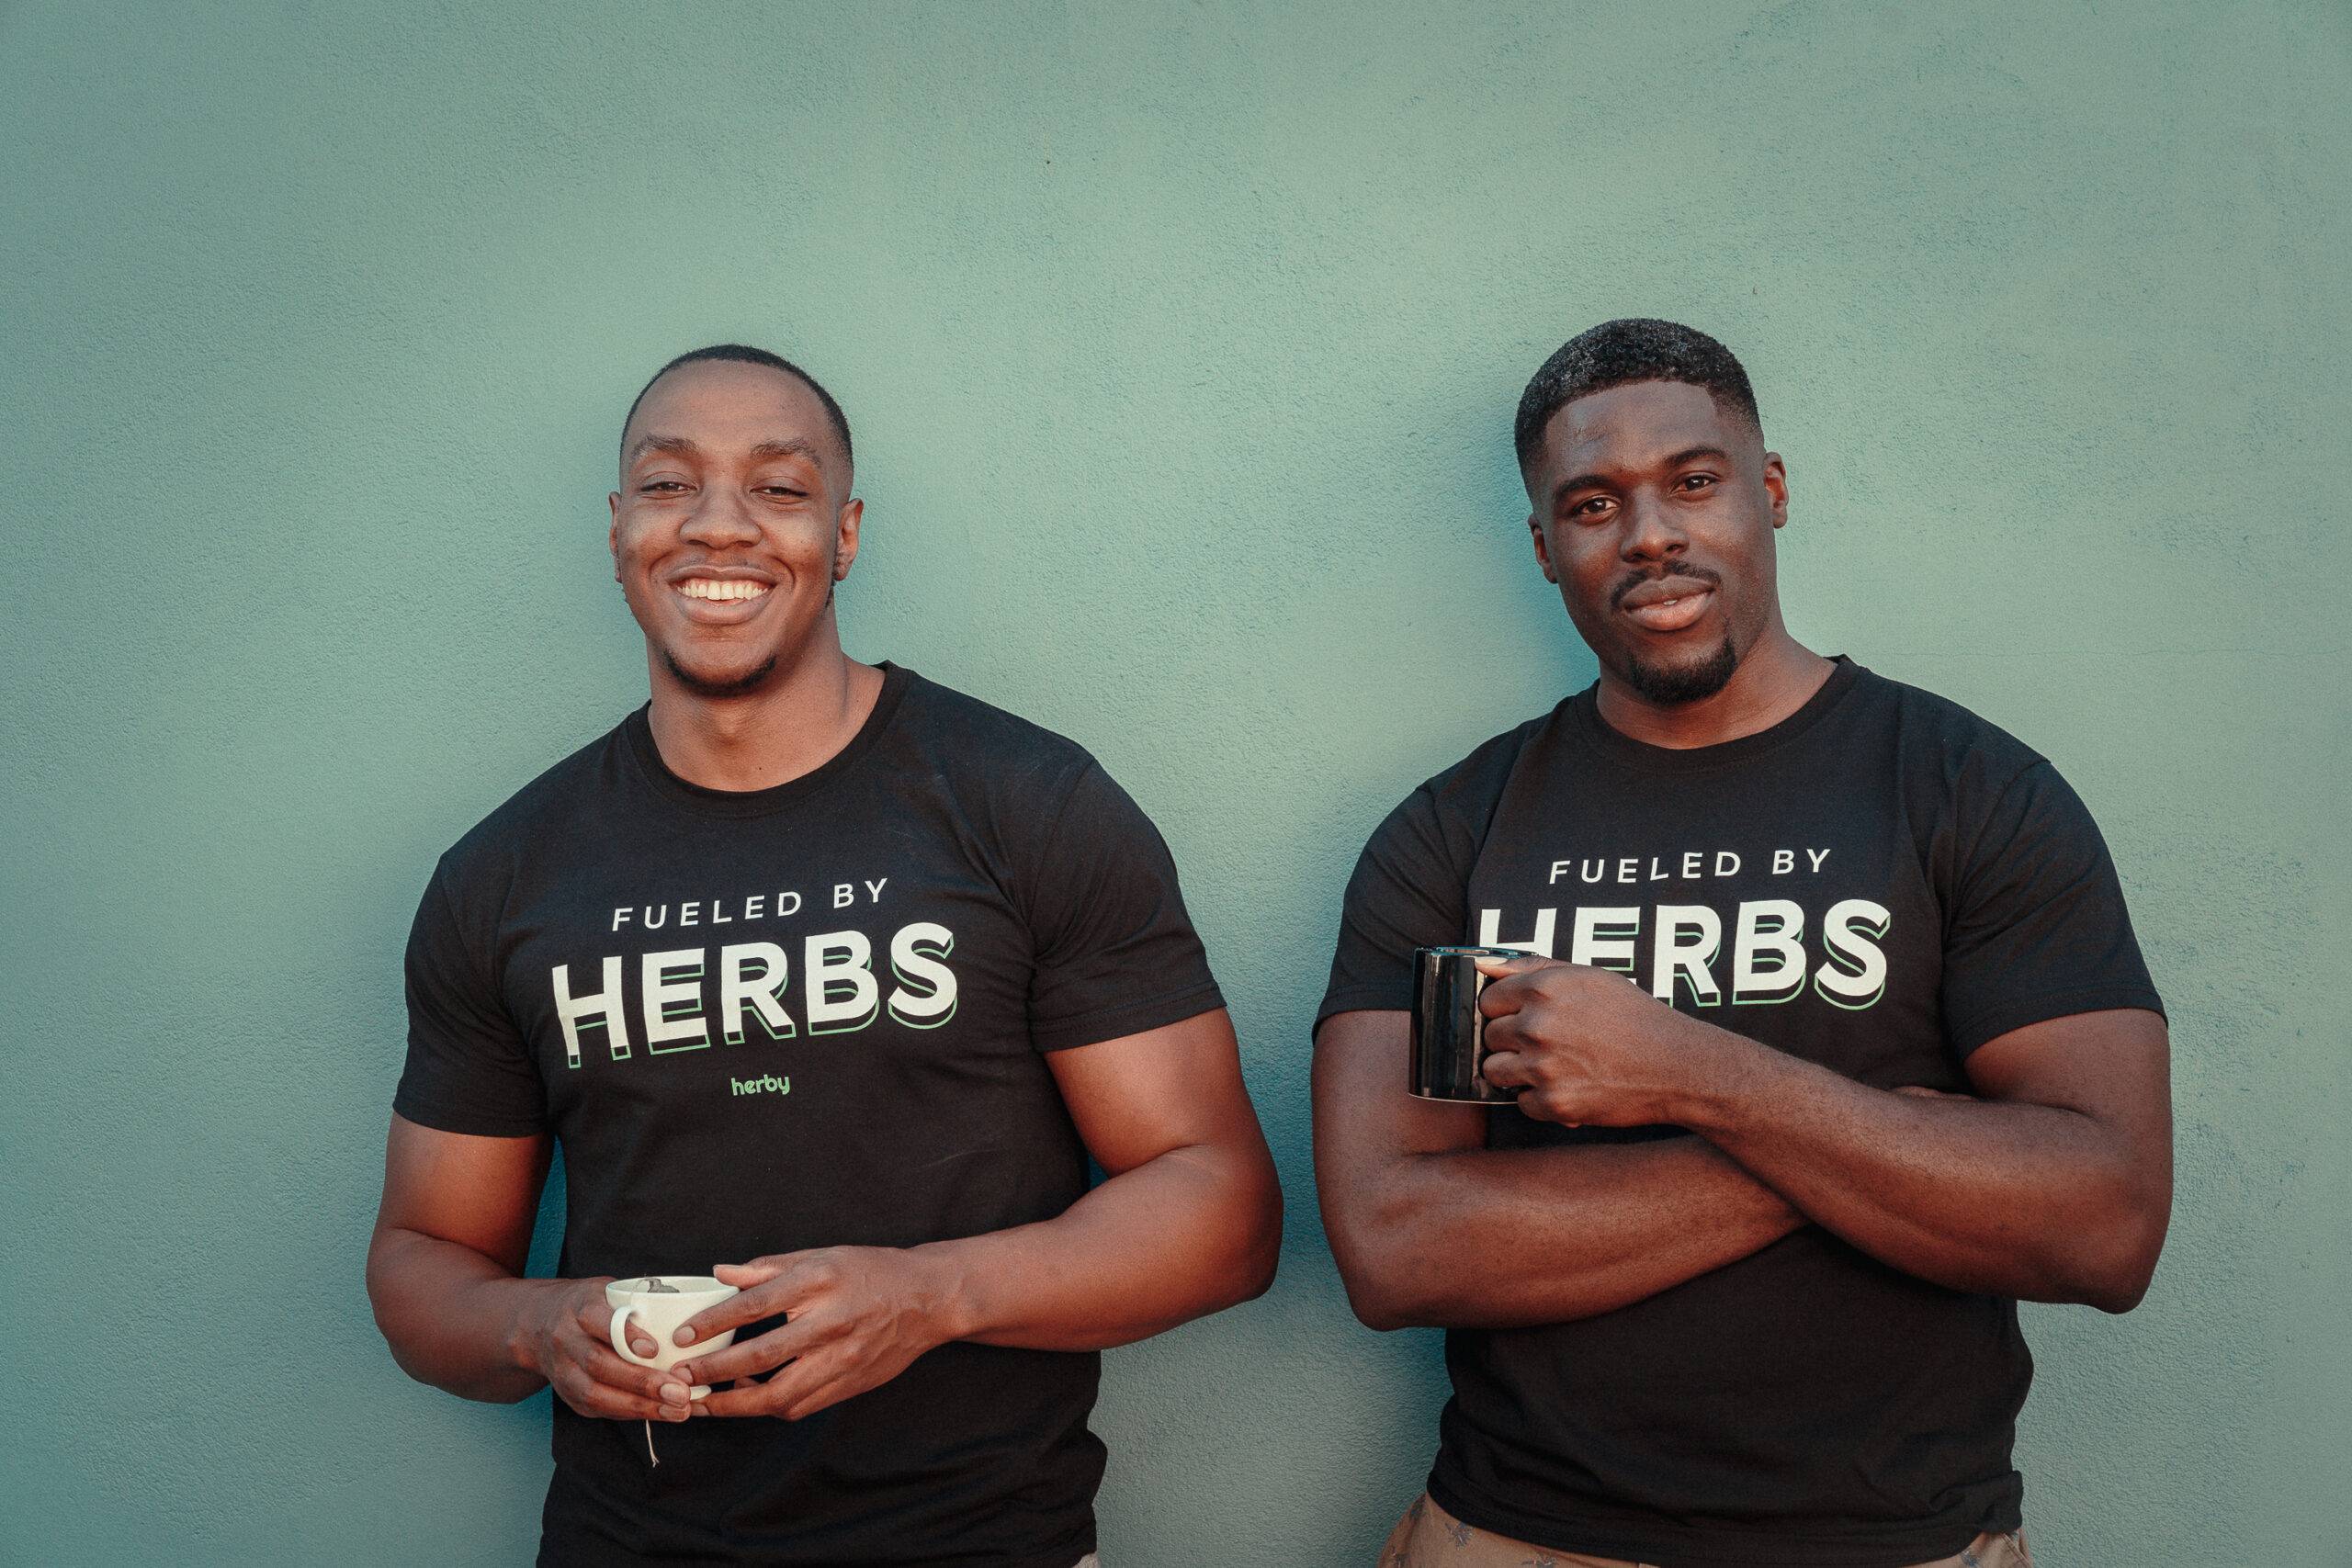 Diverse Founders Programme: Natural wellness brand Herby Box creates herbal blends tailored to specific health goals